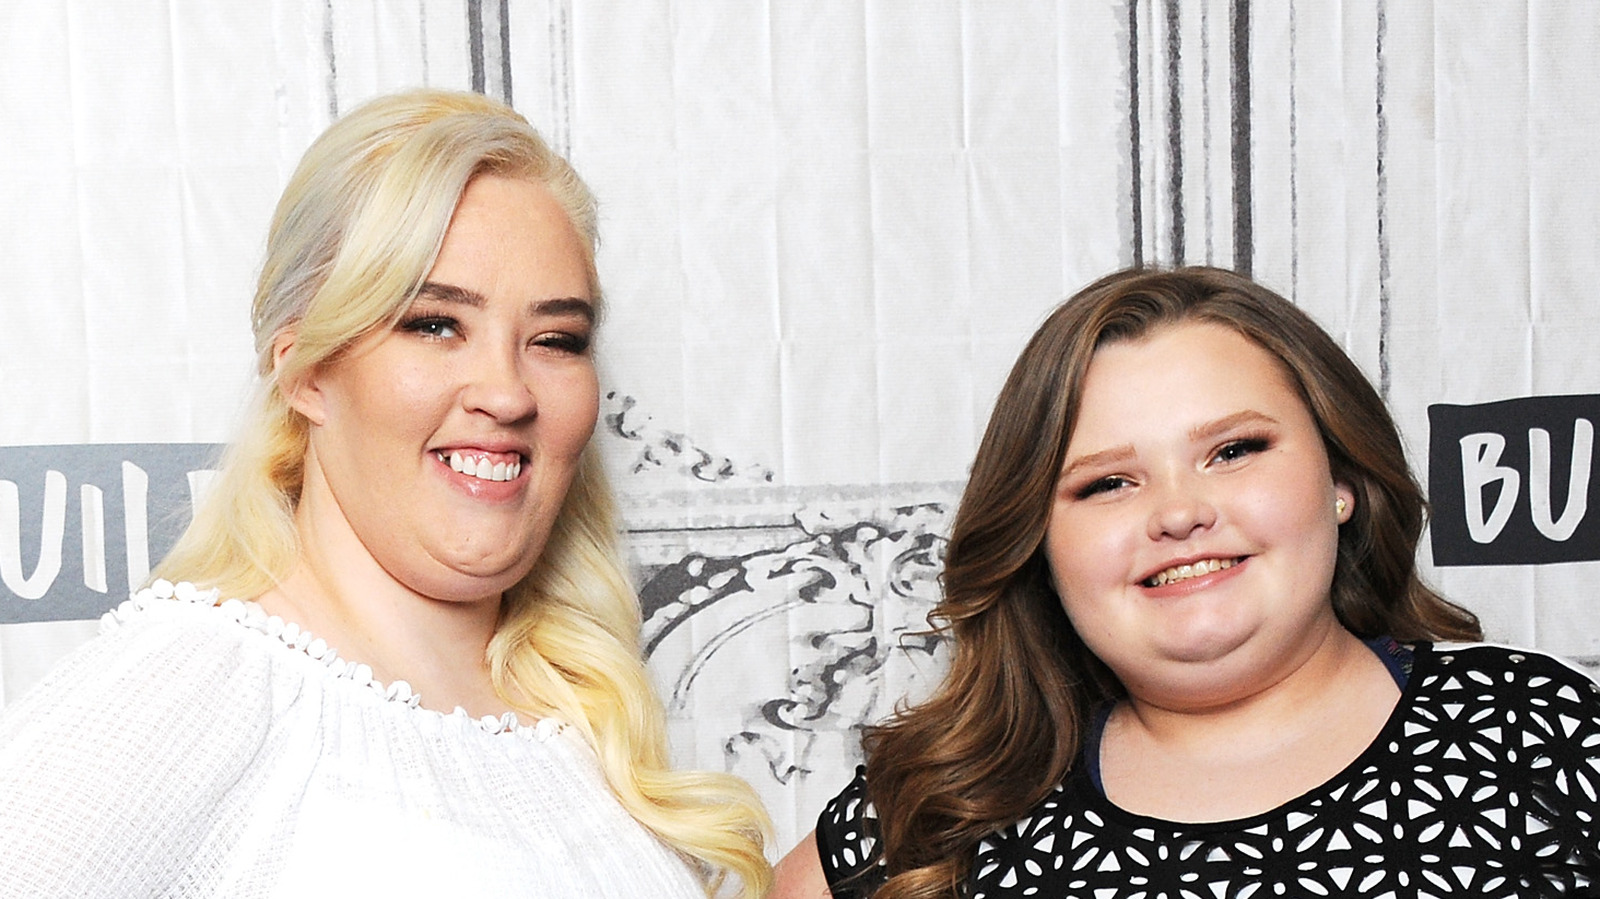 The Scandal That Led To Here Comes Honey Boo Boo Getting Canceled Internewscast Journal